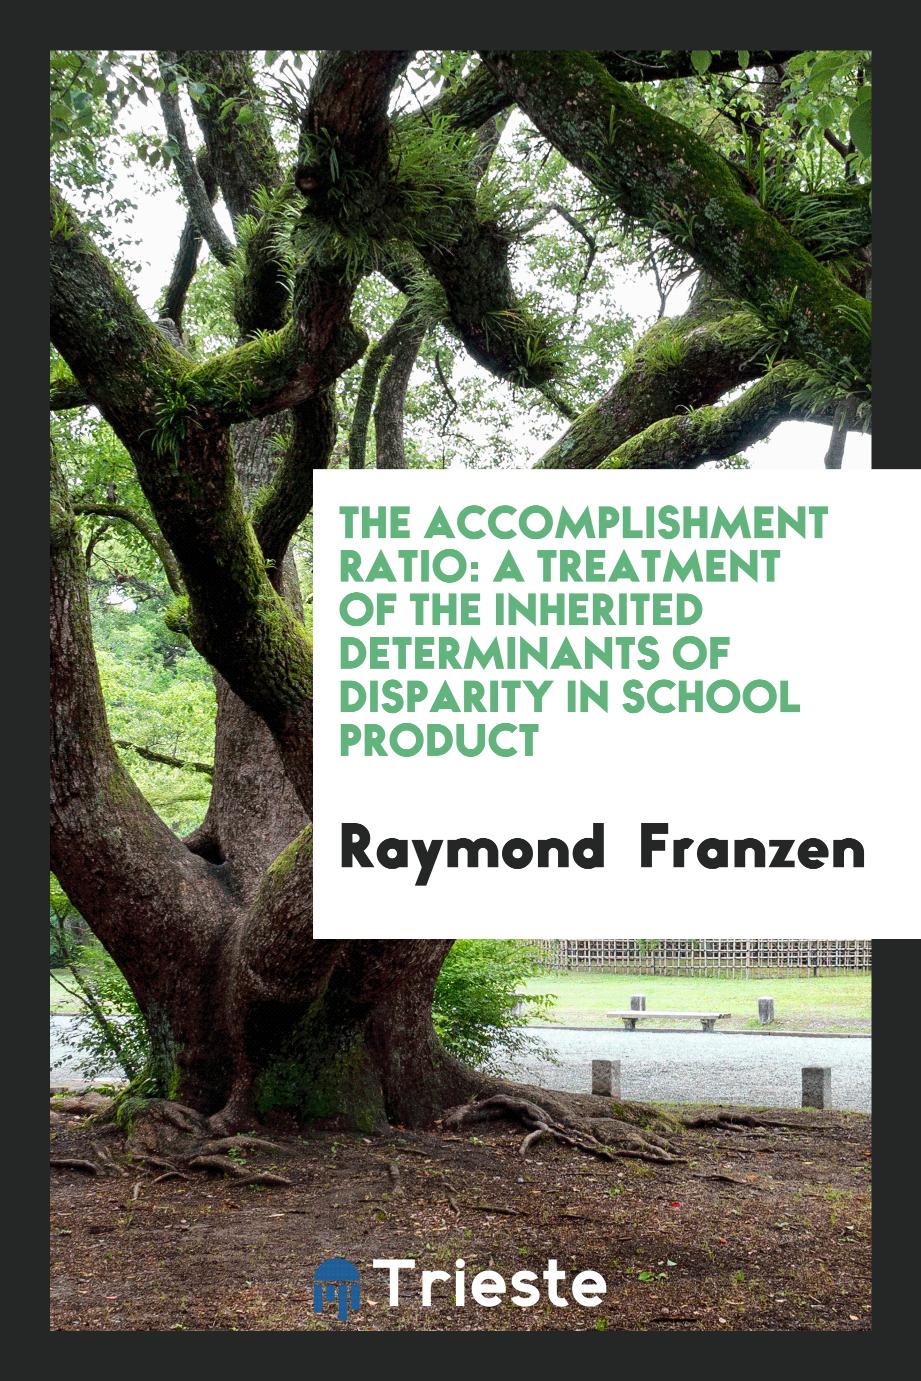 The Accomplishment Ratio: A Treatment of the Inherited Determinants of Disparity in School Product